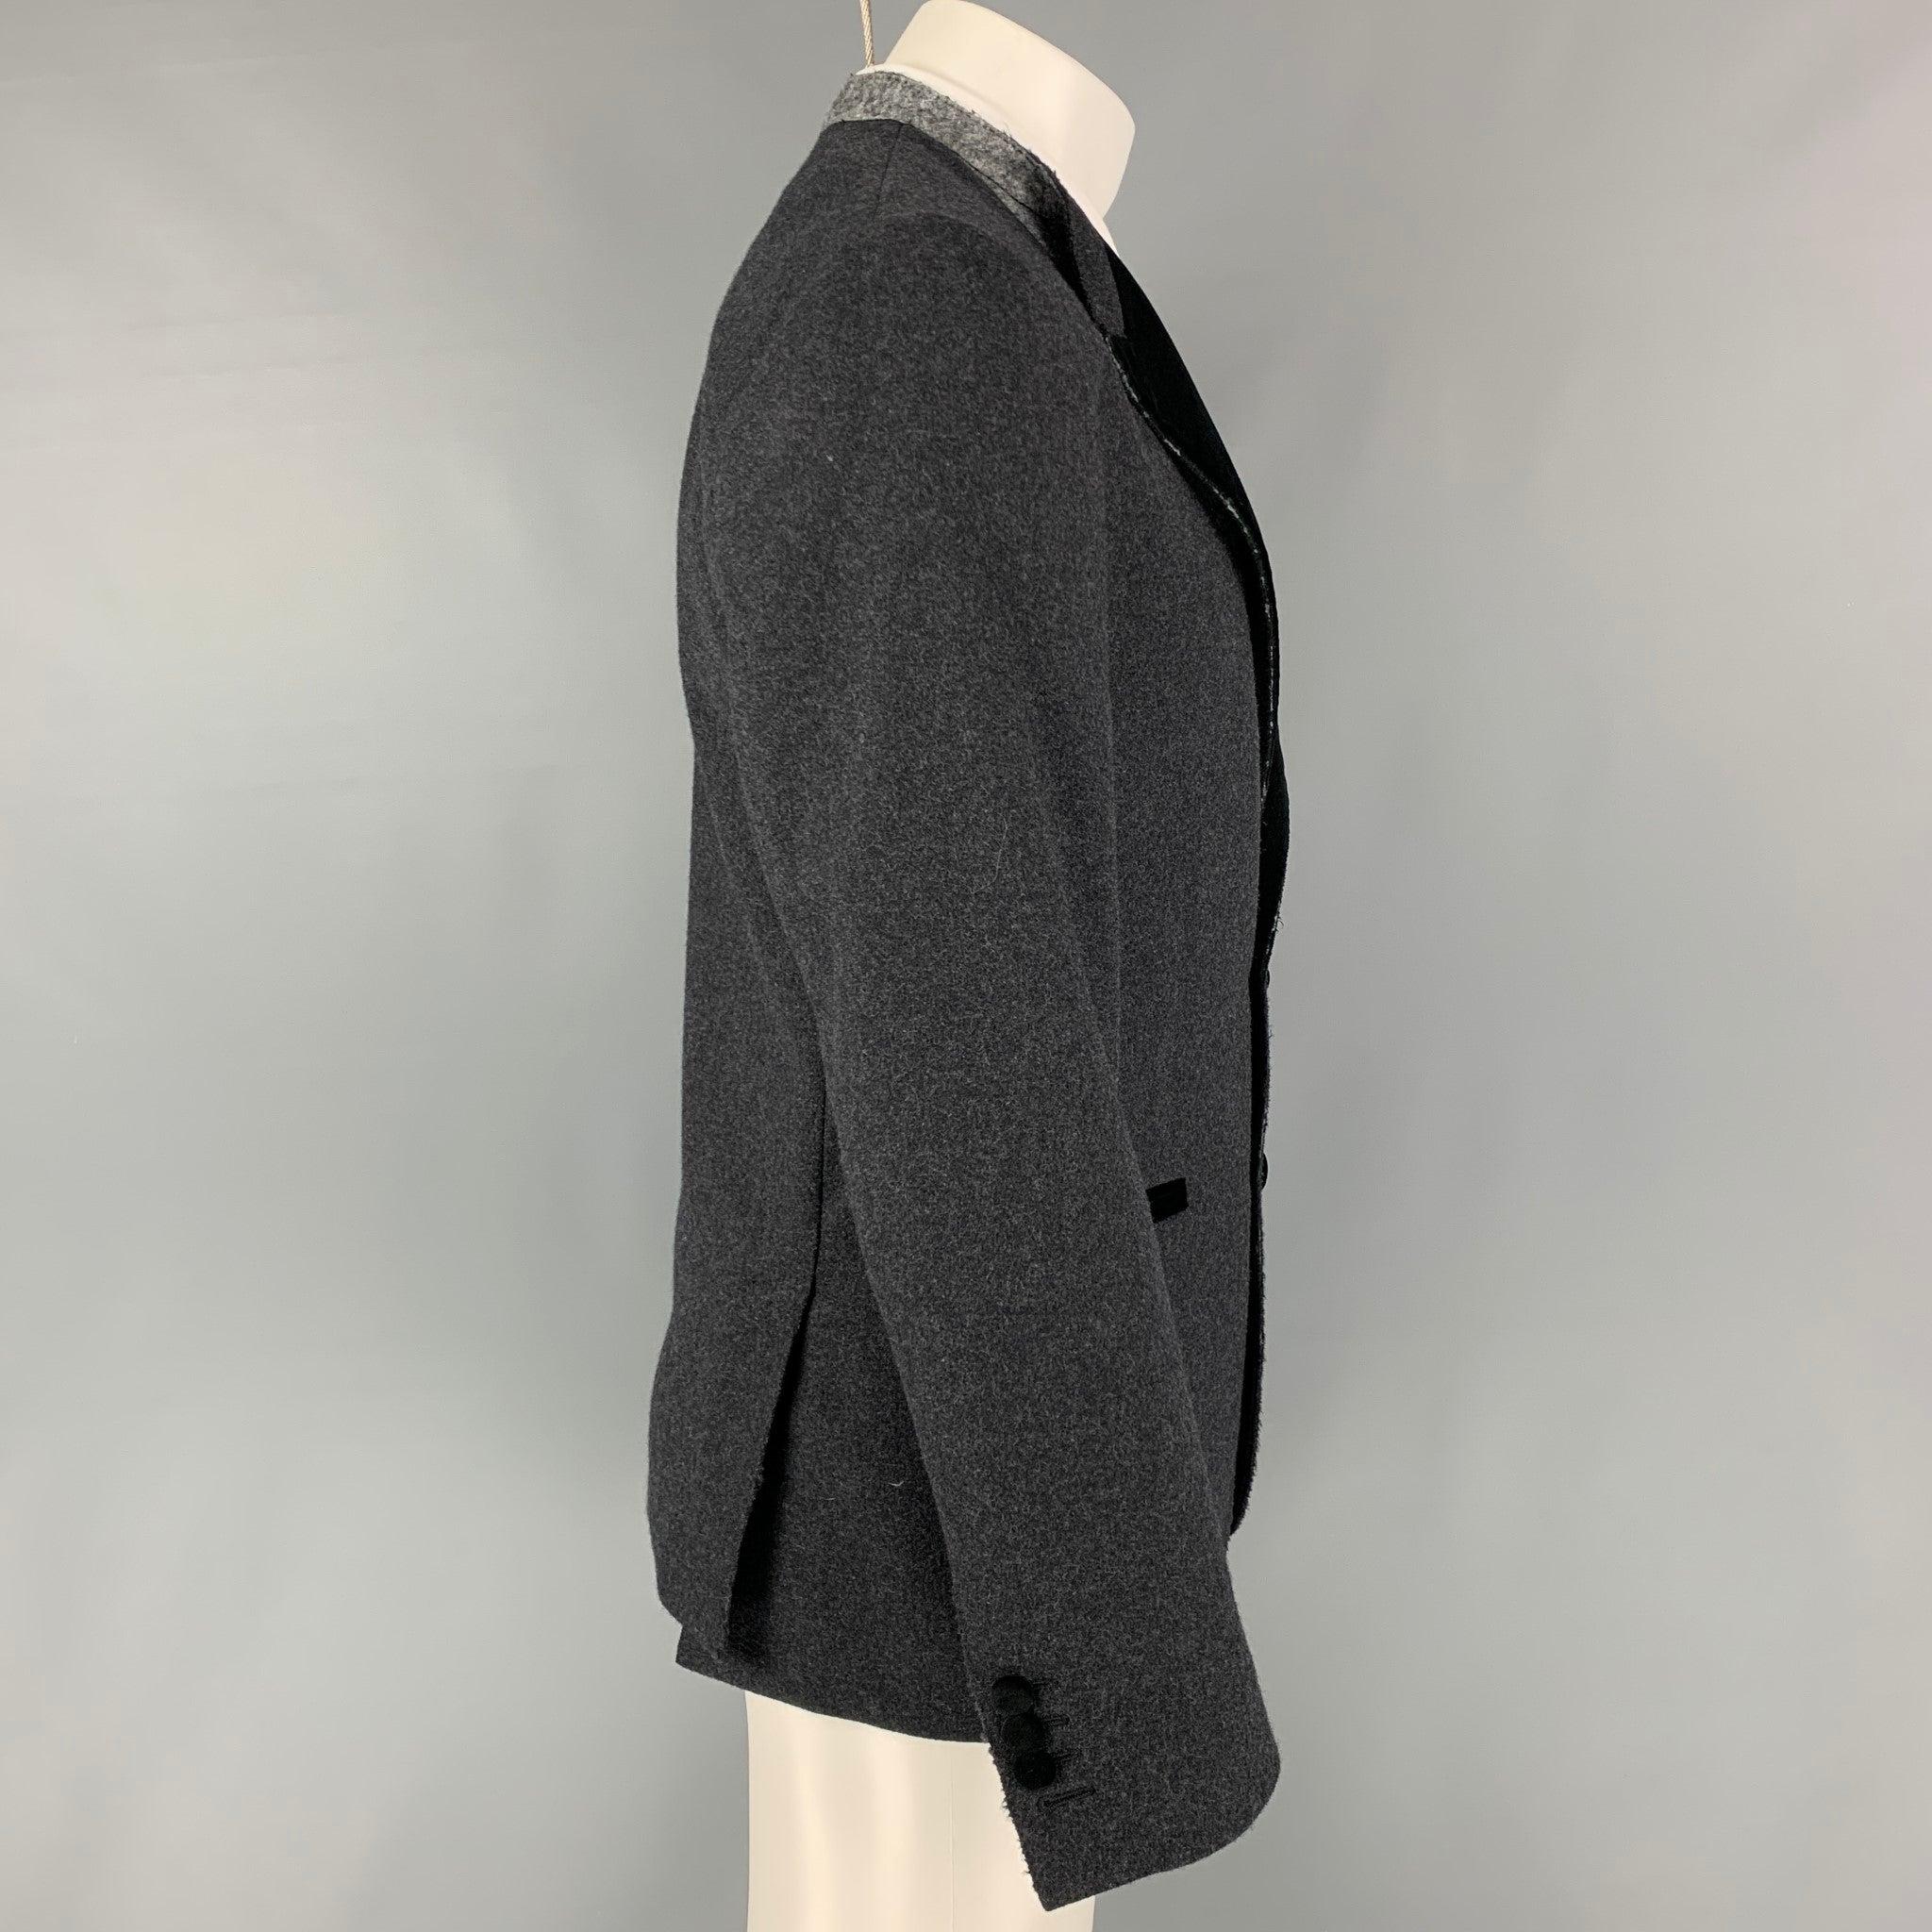 DOLCE & GABBANA Size 36 Charcoal & Black Wool Blend Sport Coat In Good Condition For Sale In San Francisco, CA